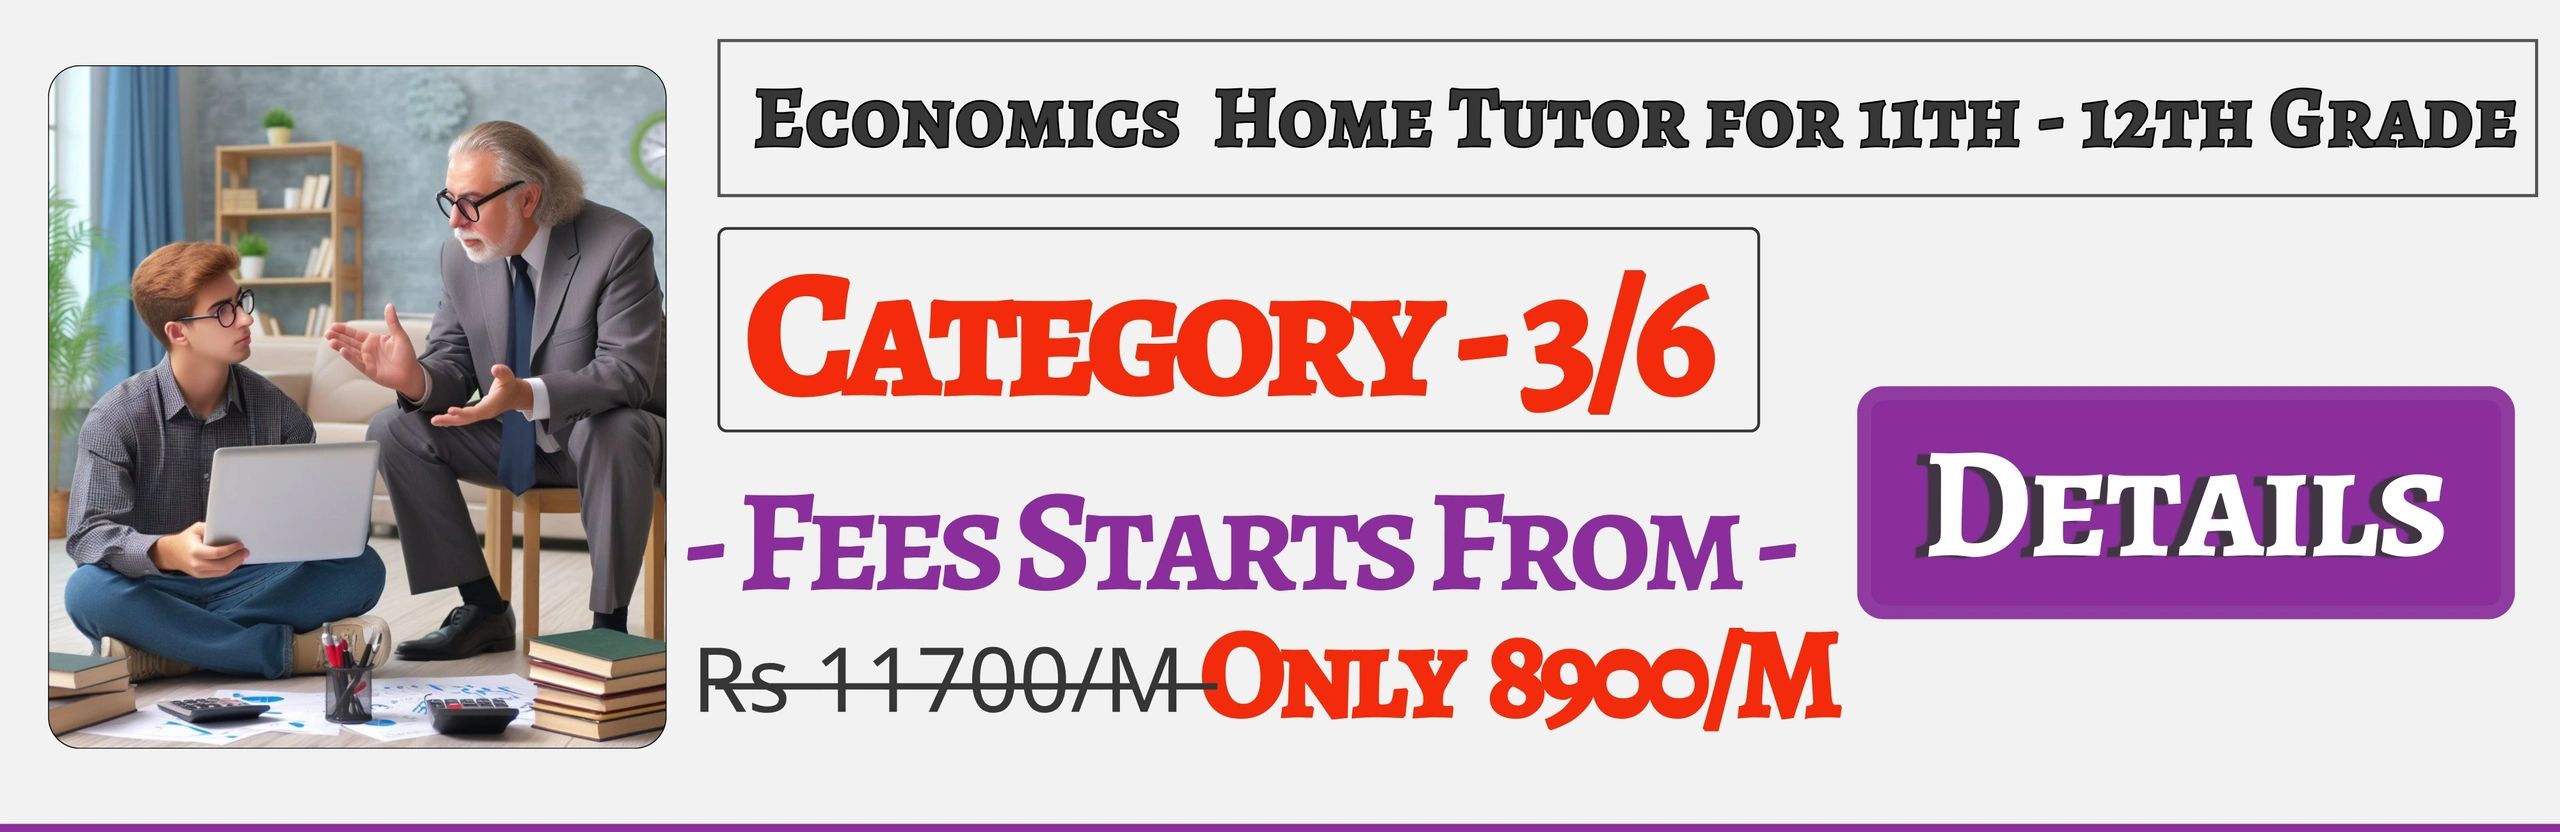 Book Best Nearby Economics Home Tuition Tutors For 11th & 12th Jaipur ,Fees Only 8900/M